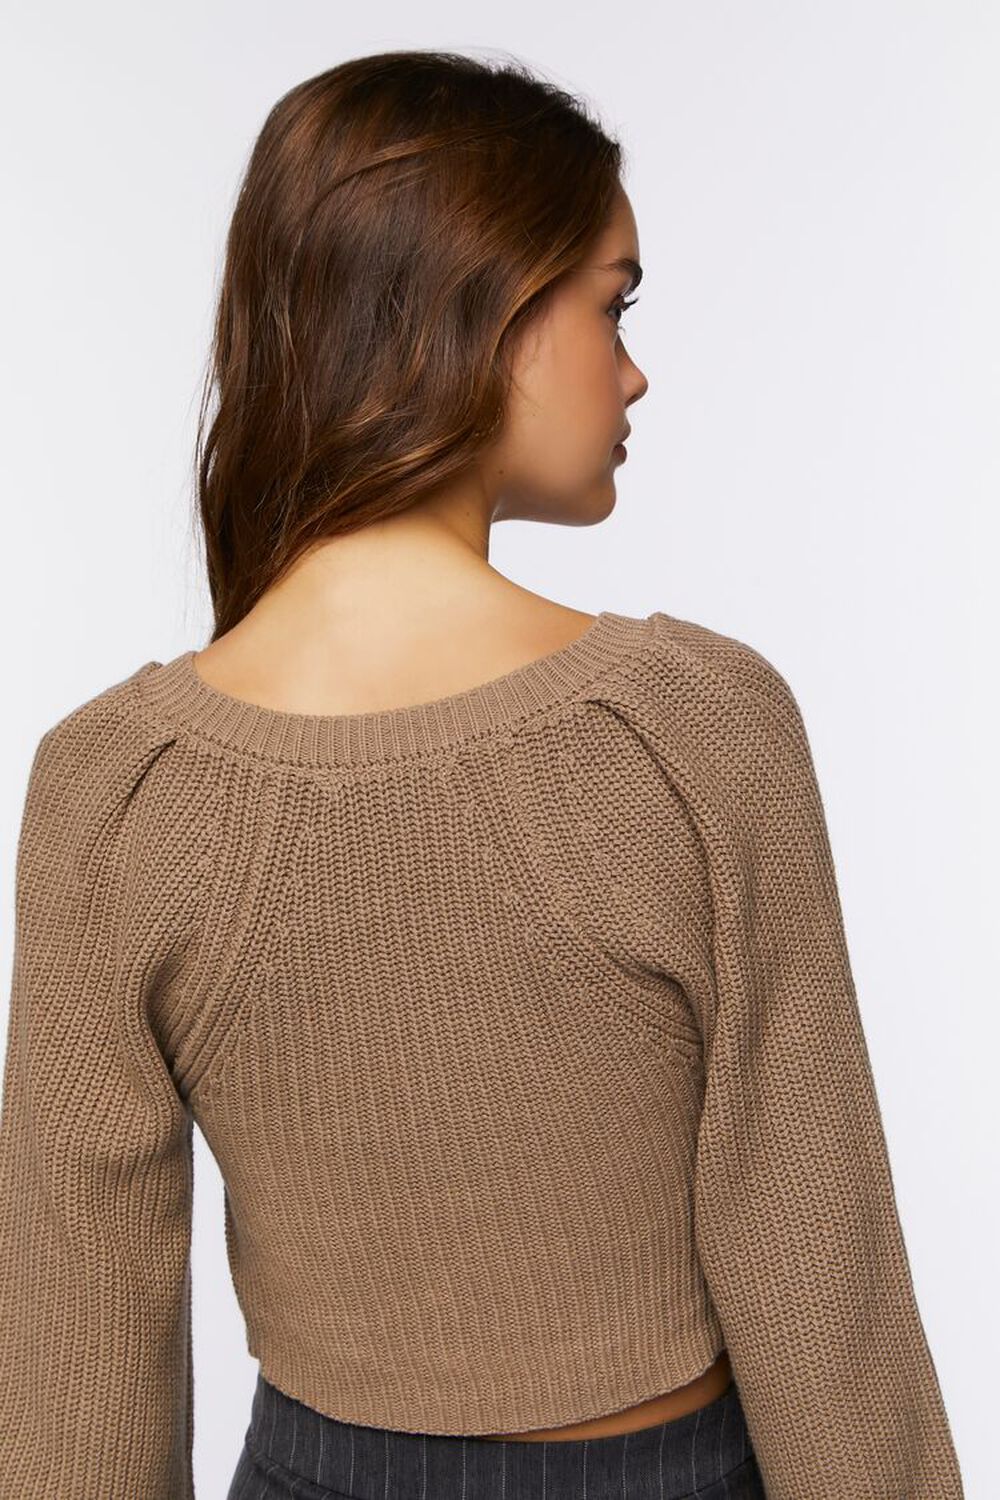 TAUPE Rib-Knit Cropped Sweater, image 3